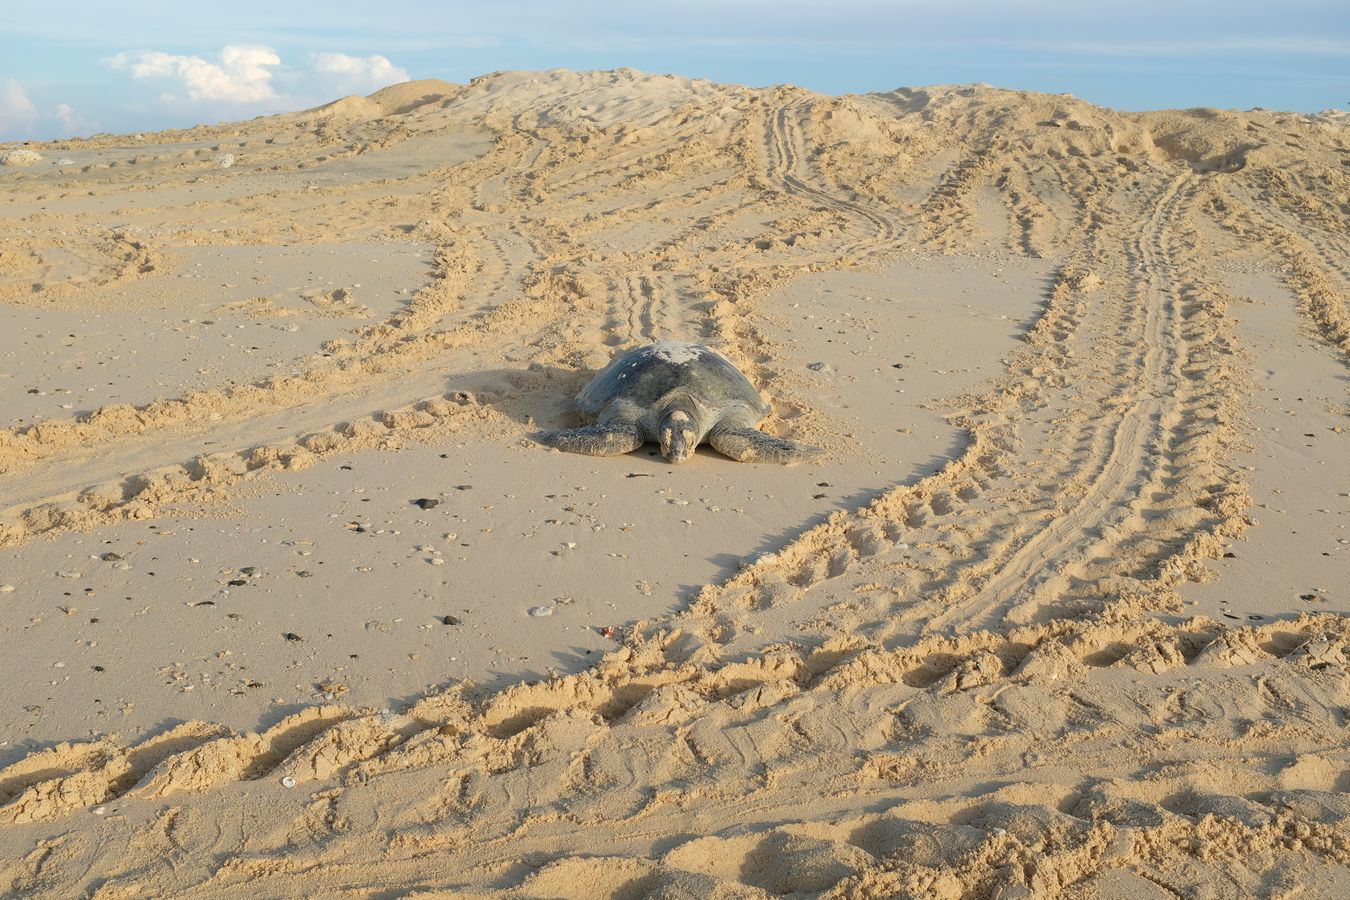 Already in the morning green turtle goes down a dune on the beach on its return to the ocean after laying its eggs.